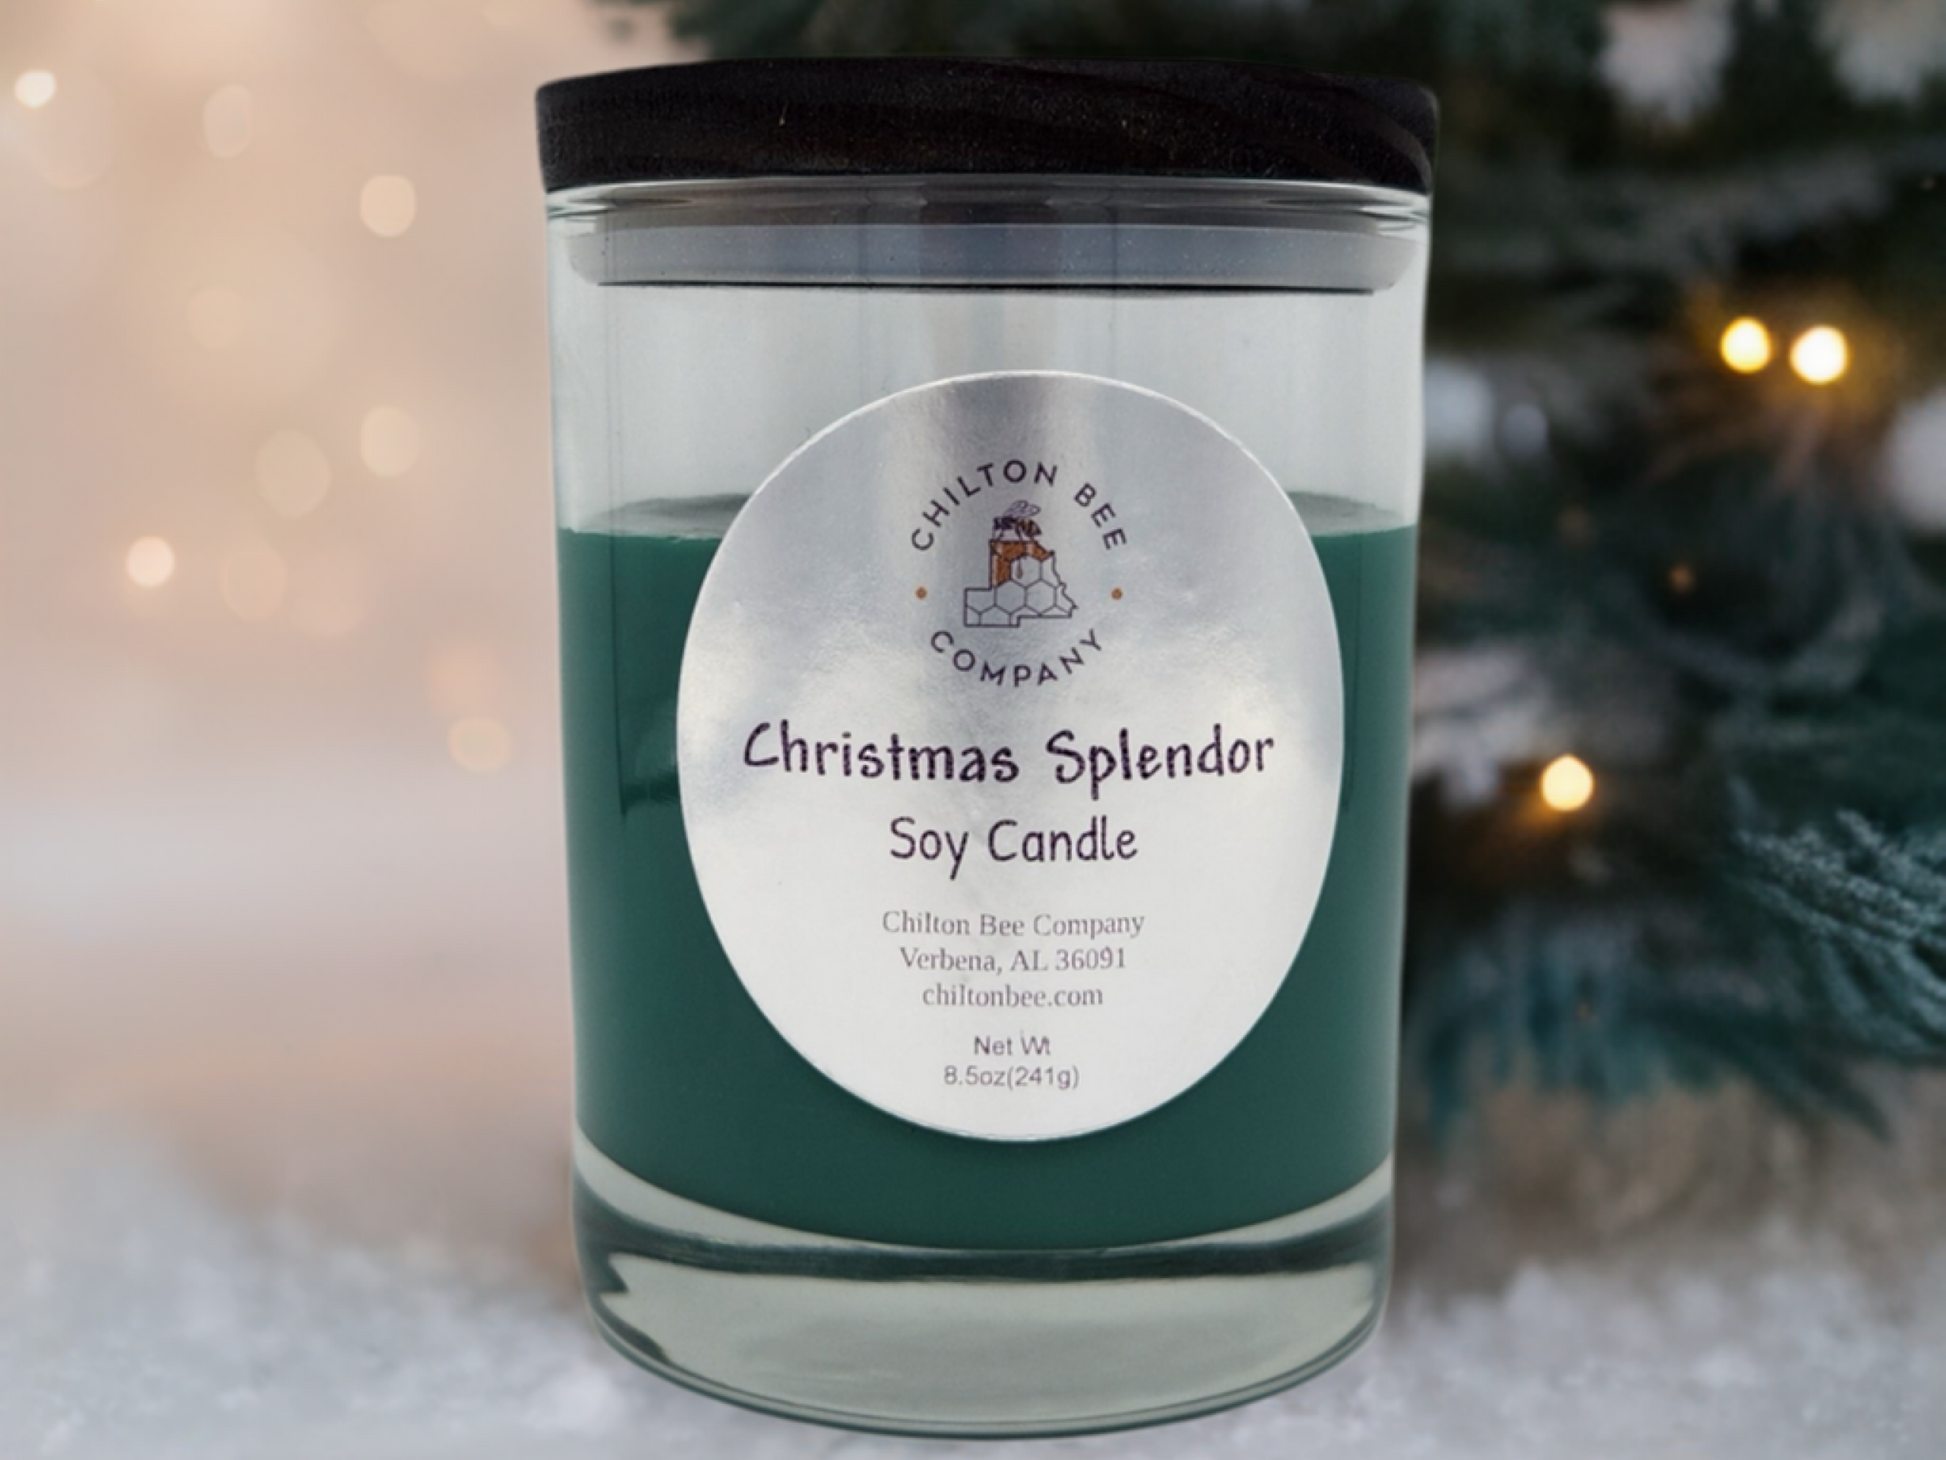  Luxurious Tumbler Jar Soy Candle - Chilton Bee Company